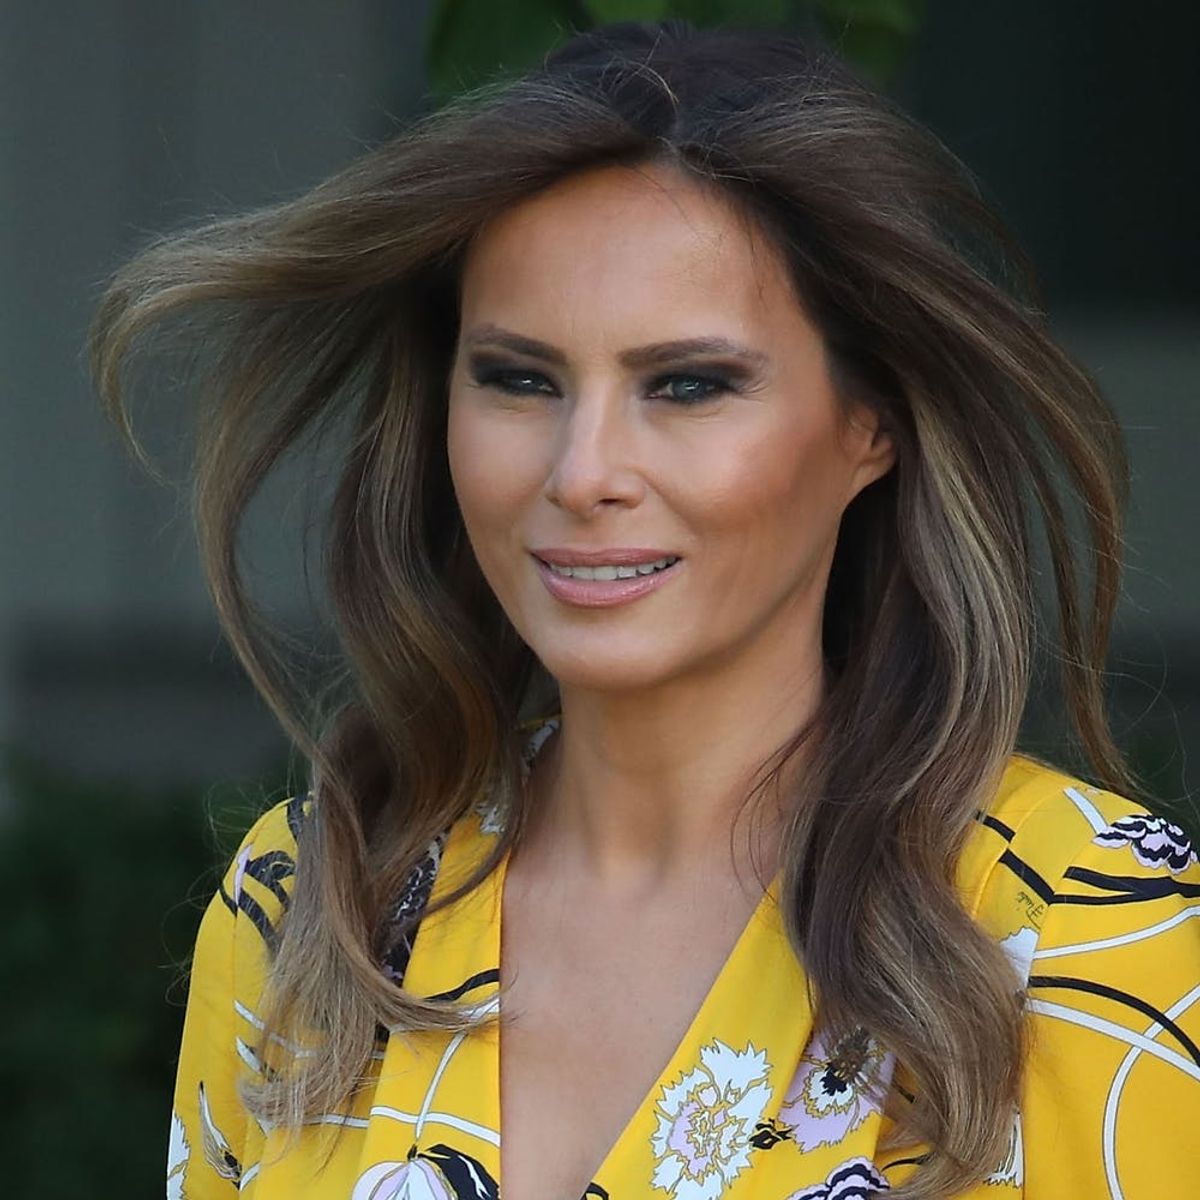 Why Melania Trump Is Different from Other First Ladies